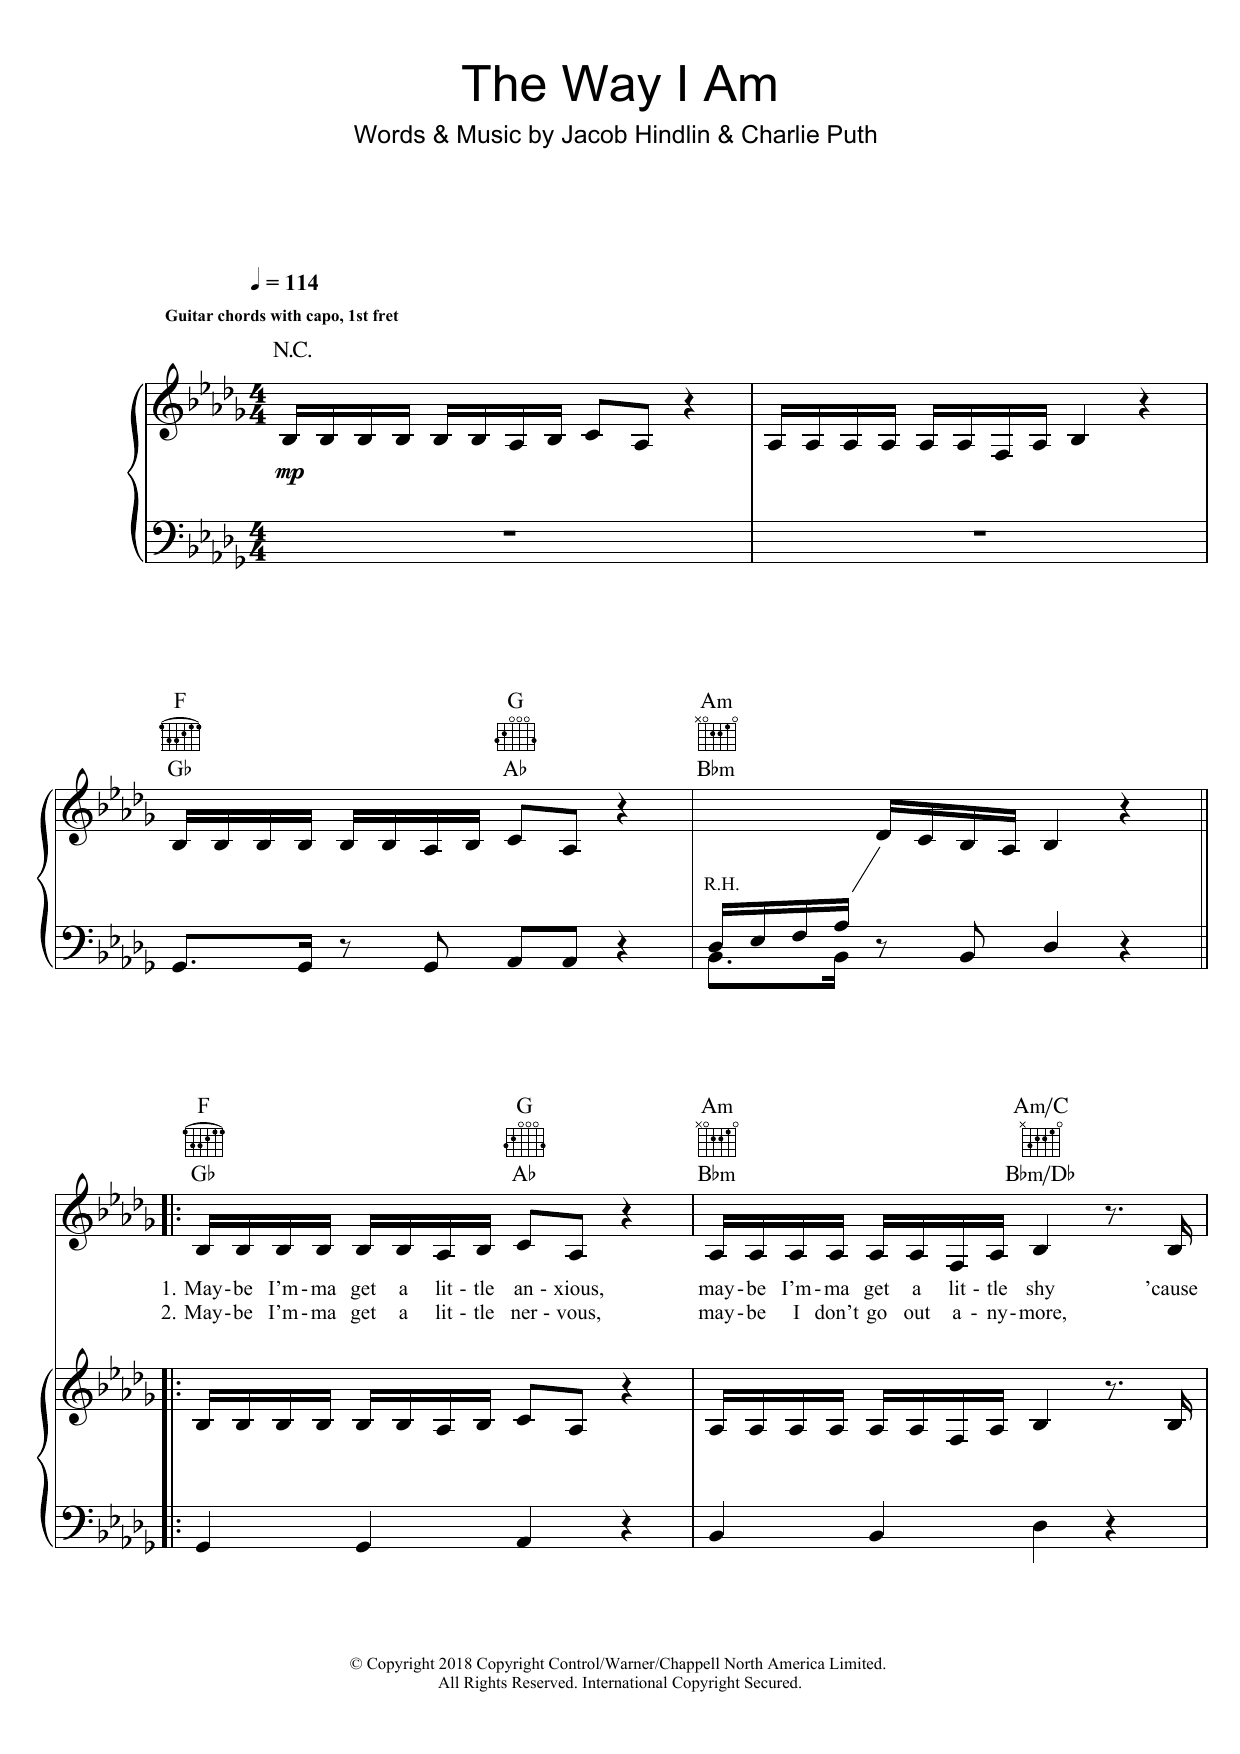 Download Charlie Puth The Way I Am Sheet Music